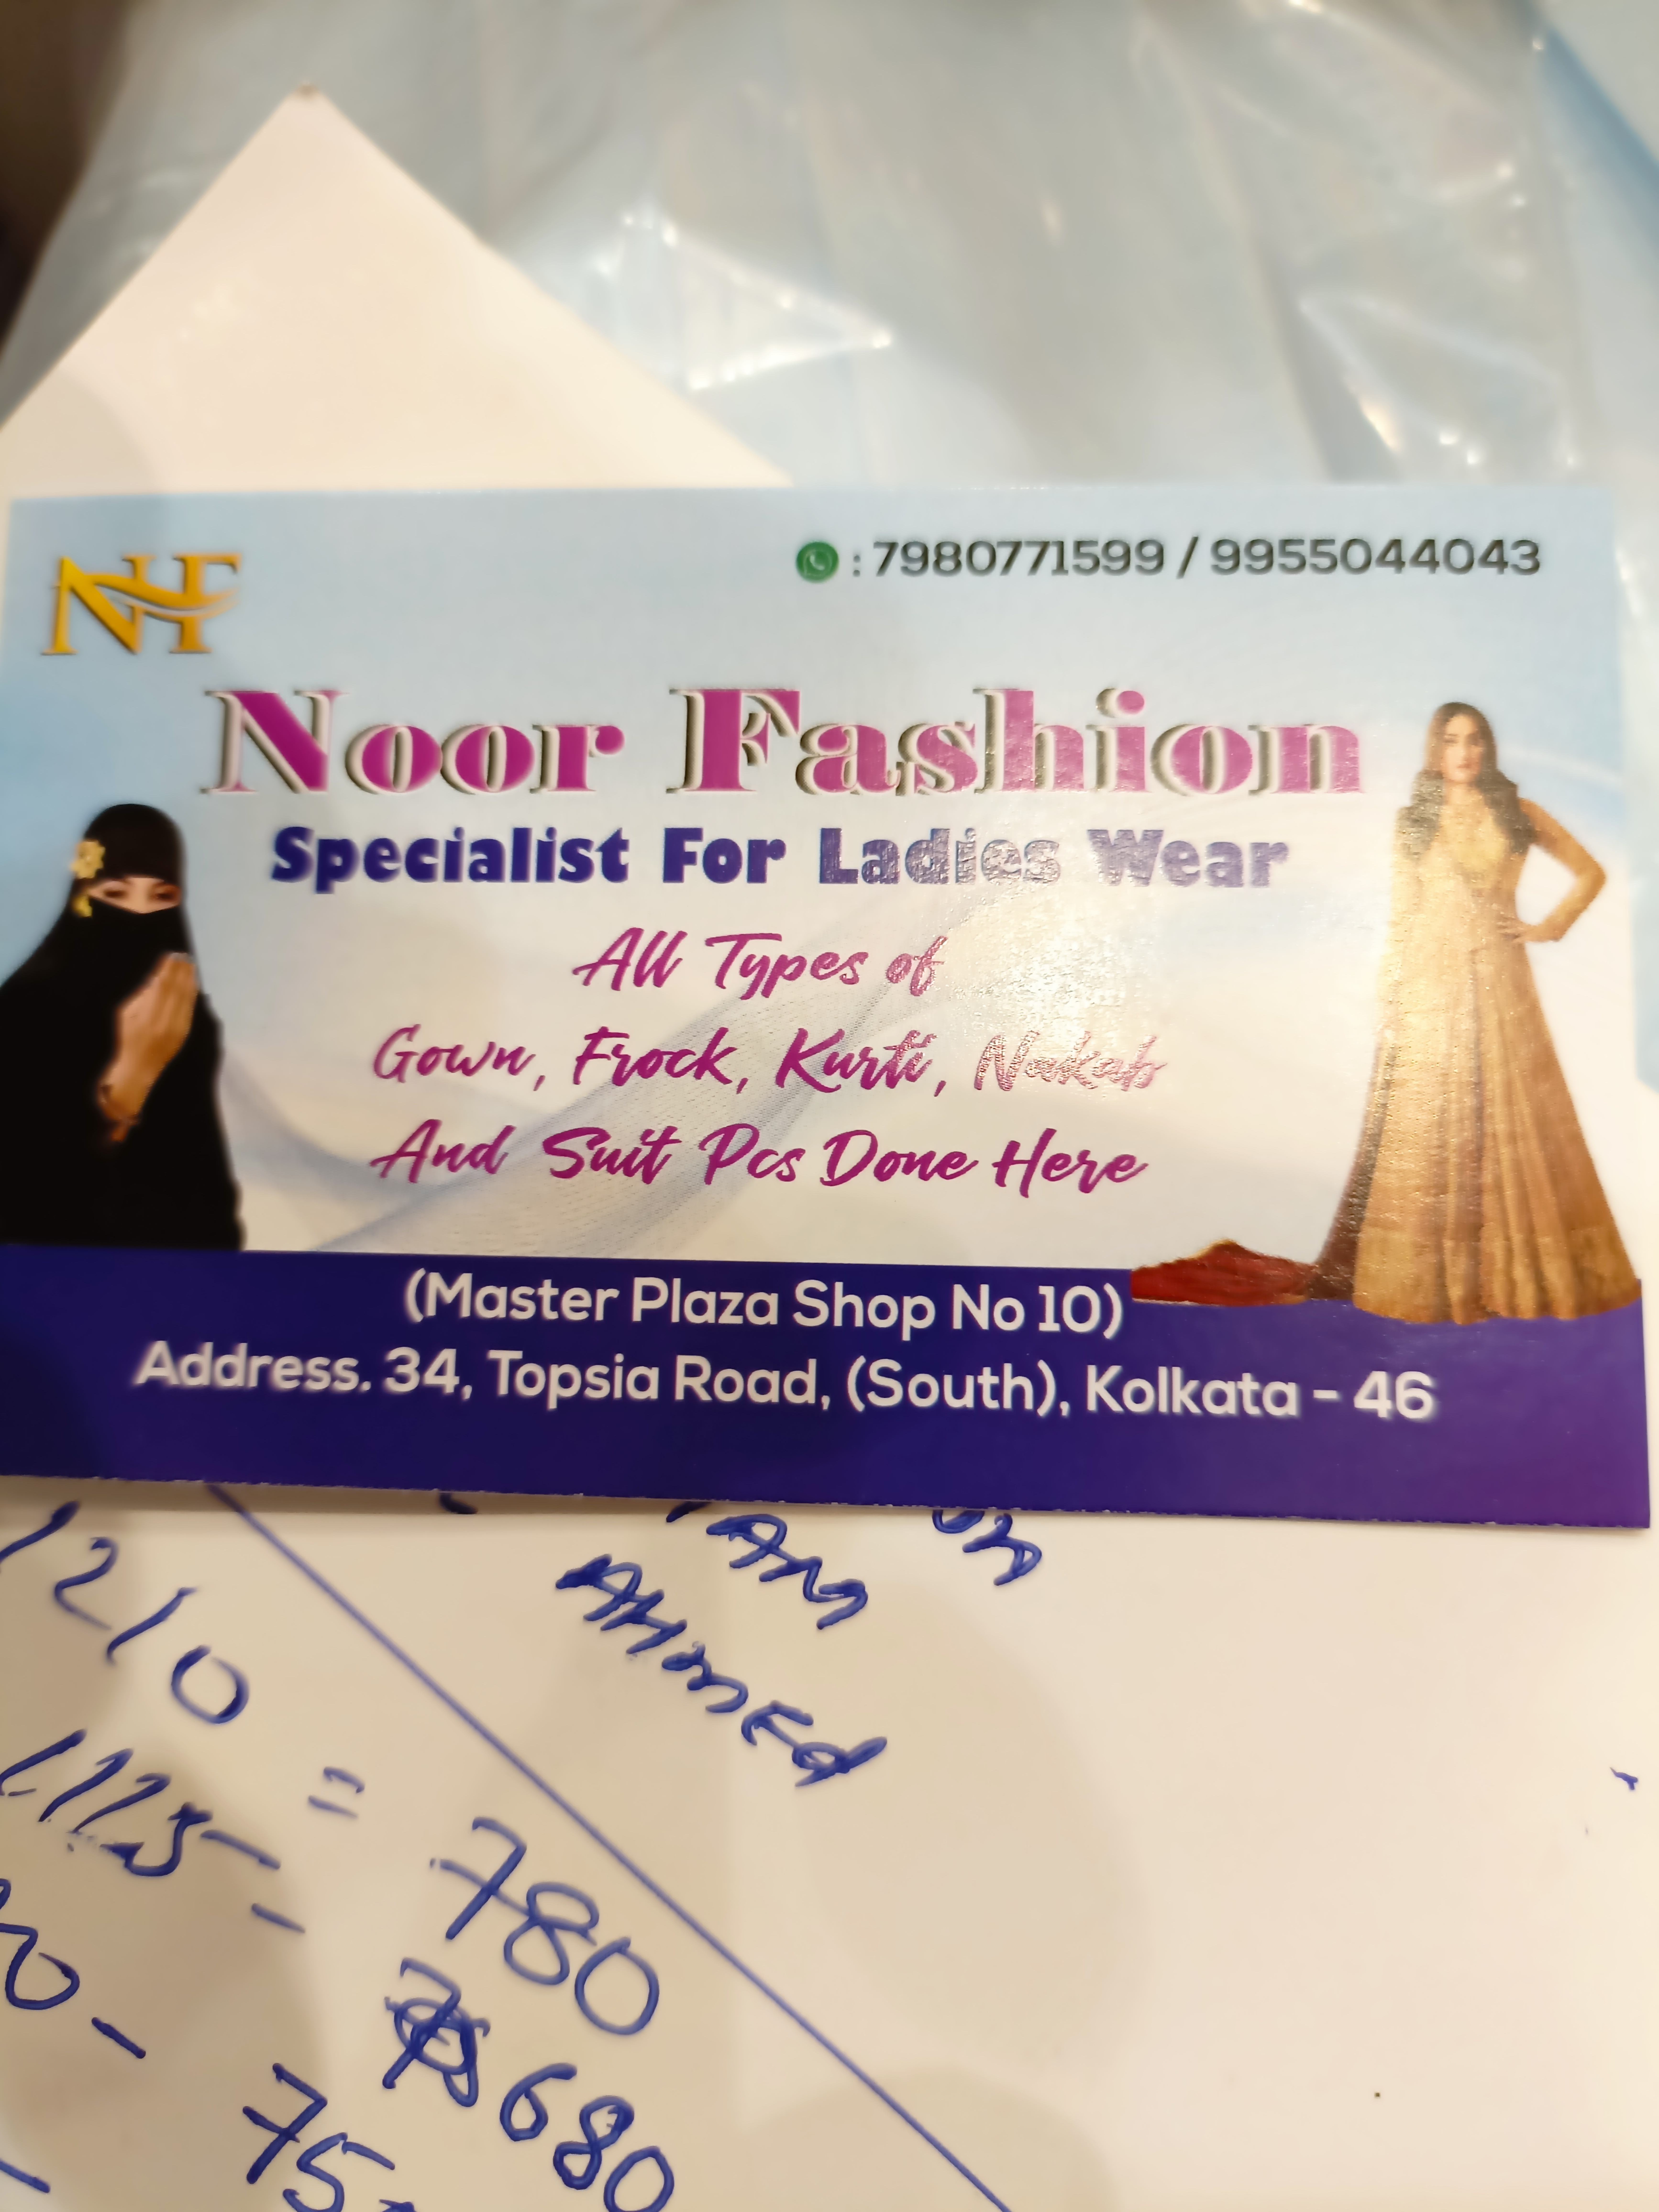 Business logo of Suit gown kurti & Naqab